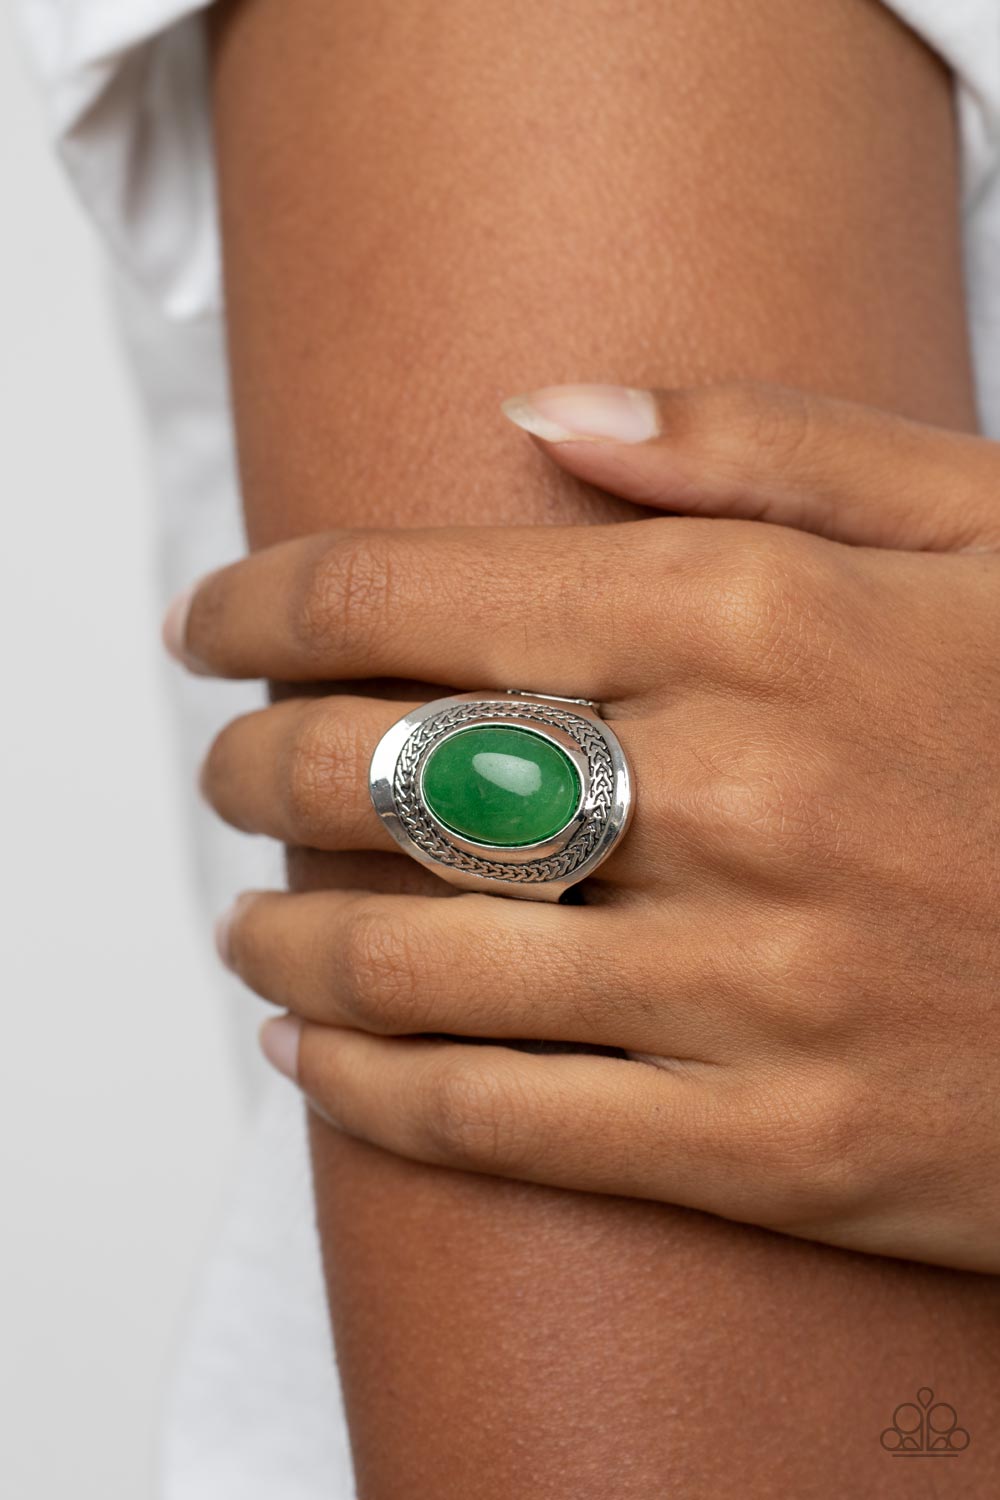 Paparazzi Accessories - Rockable Refinement #R818 - Green Rings